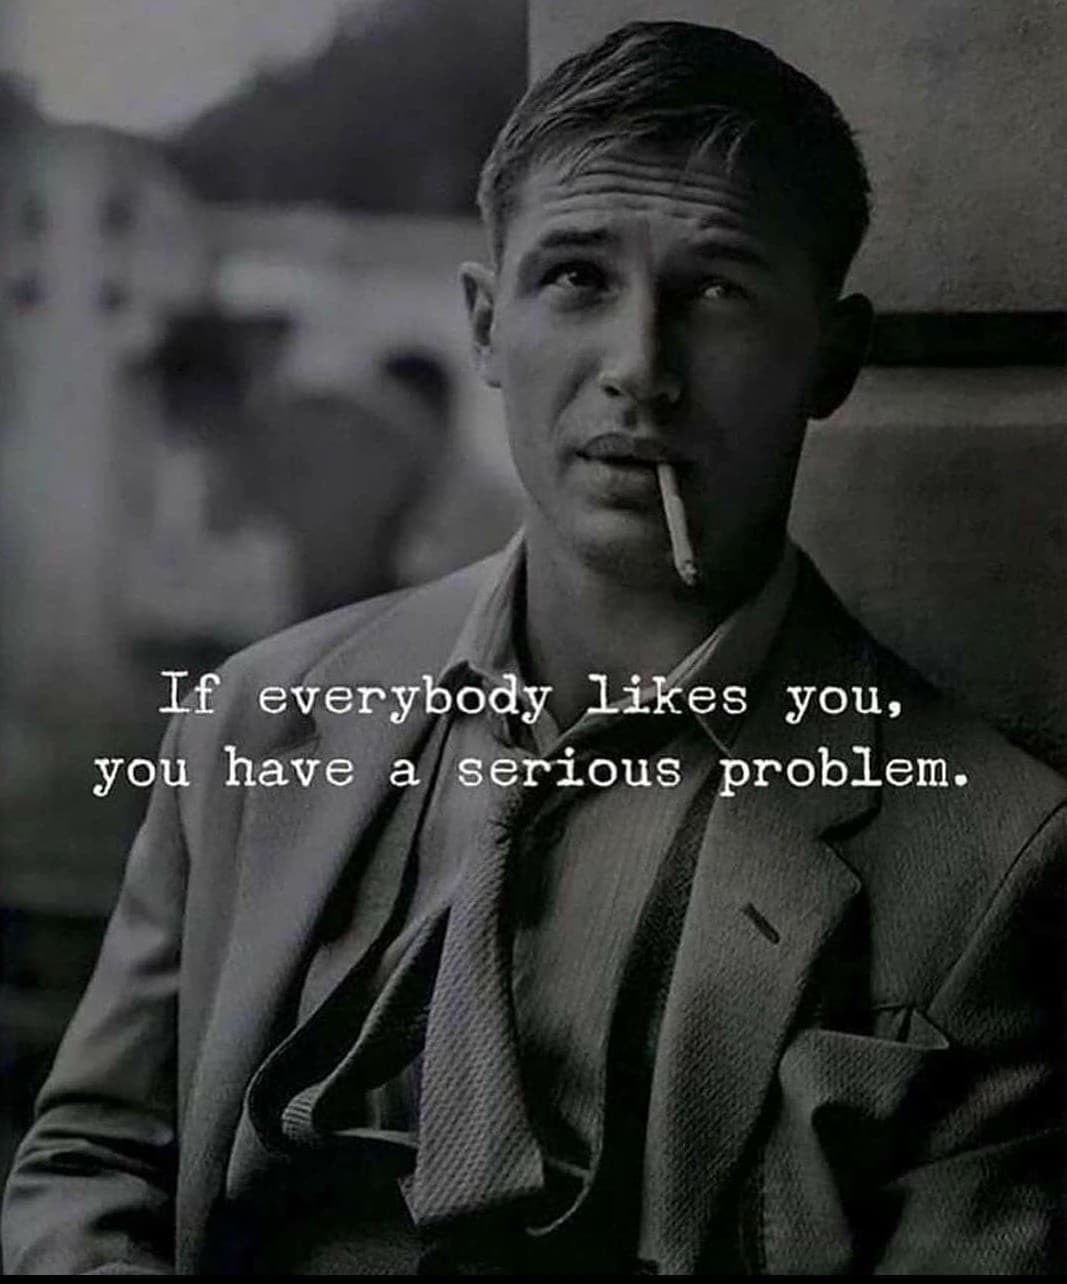 If everybody likes you have a serious problem.